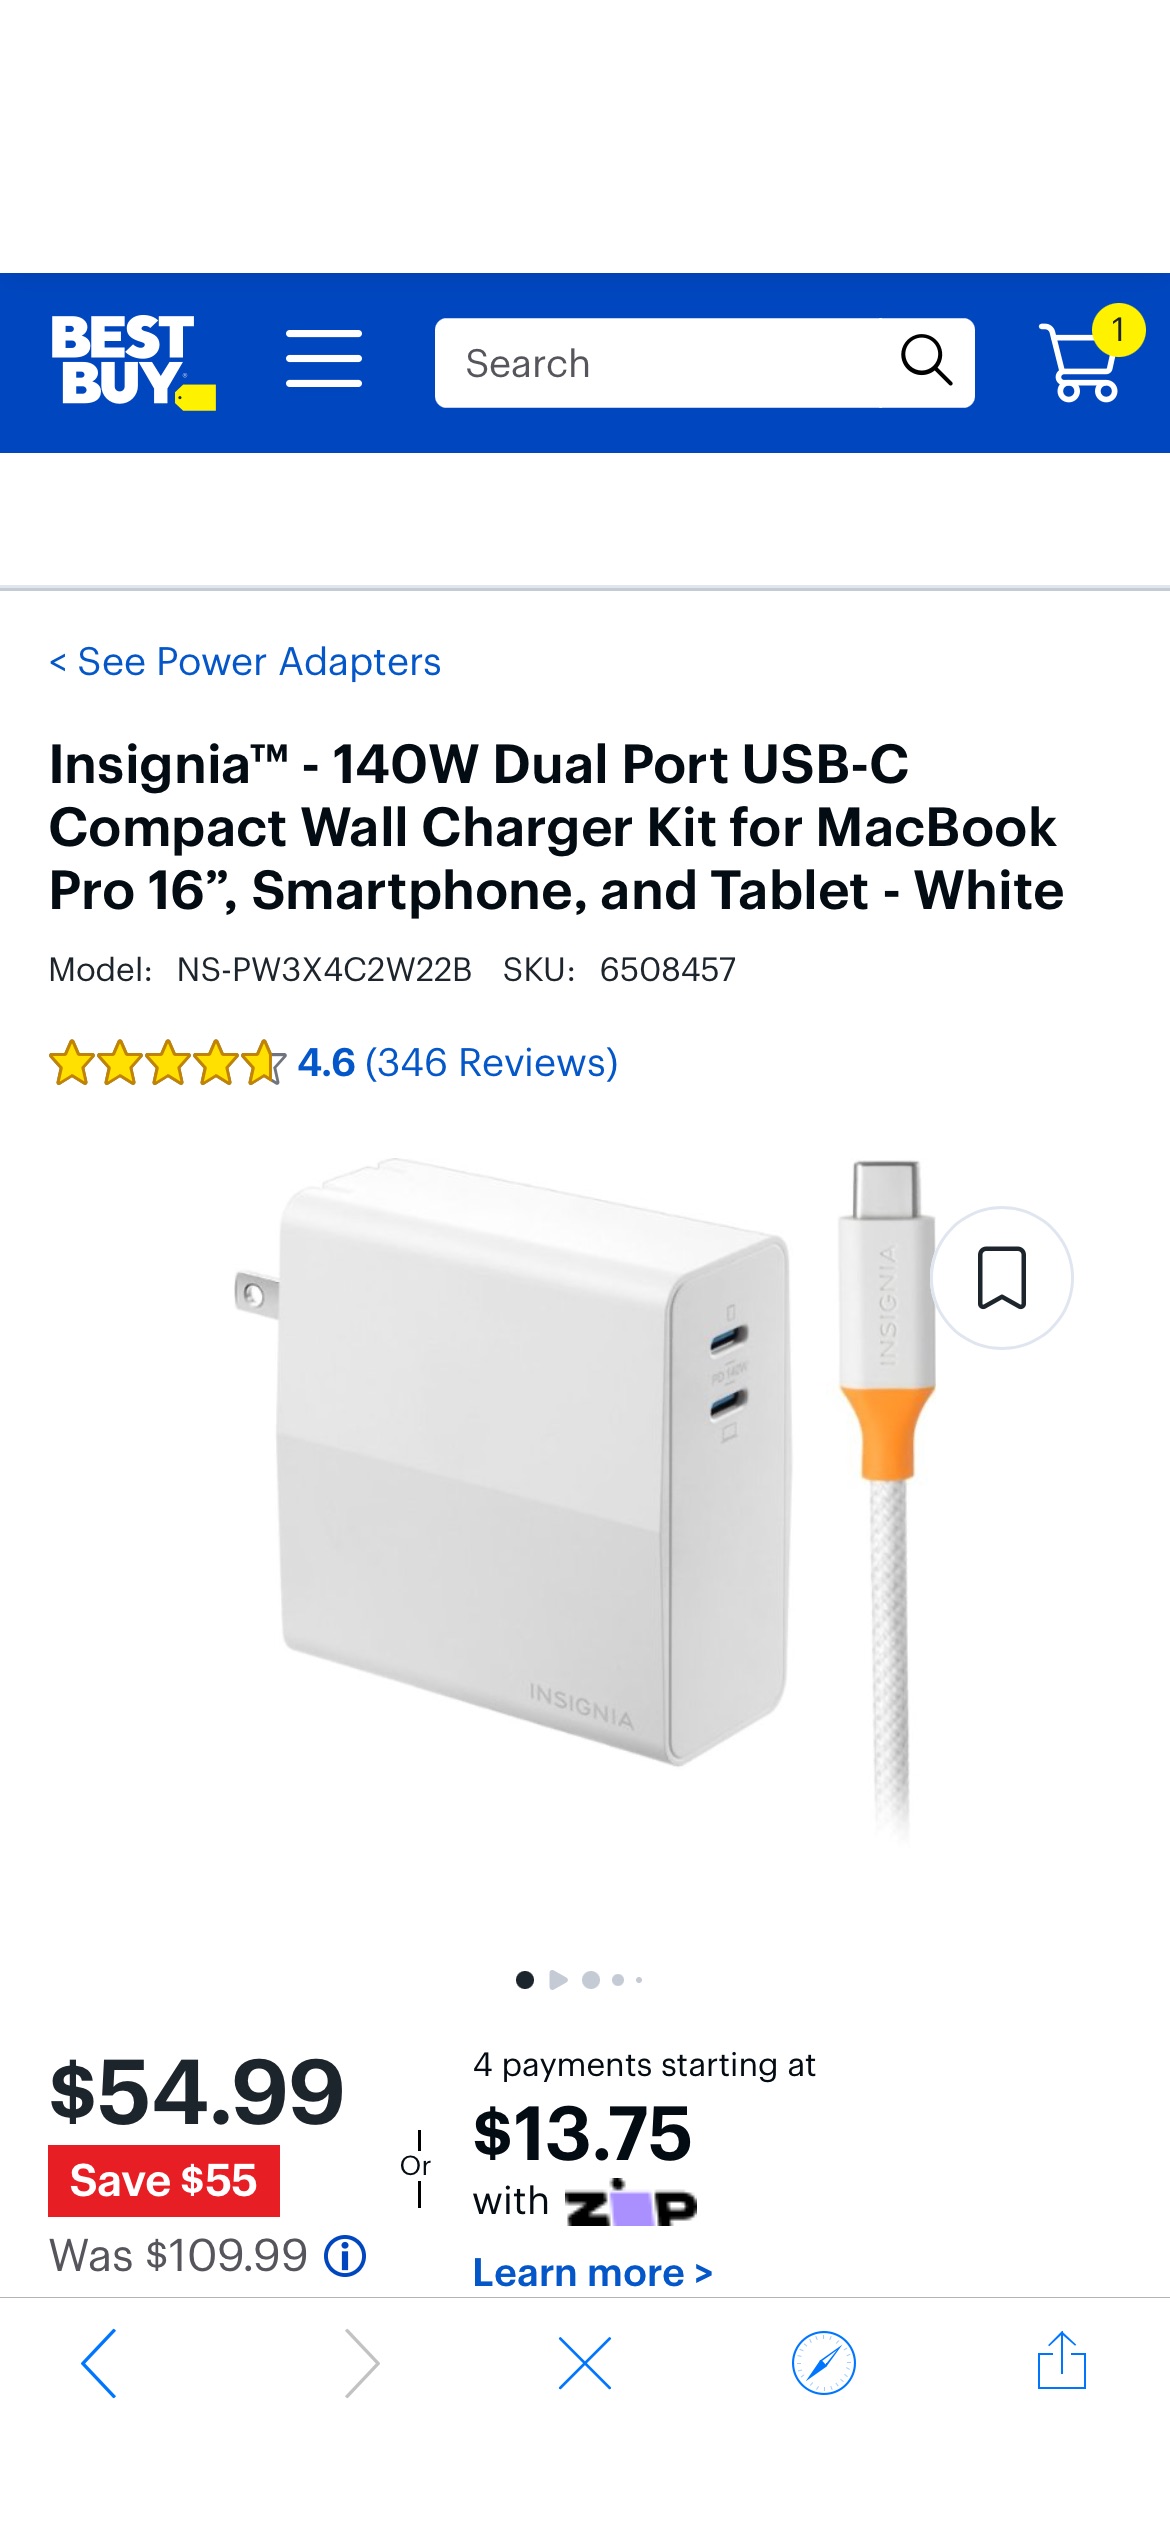 Insignia™ 140W Dual Port USB-C Compact Wall Charger Kit for MacBook Pro 16”, Smartphone, and Tablet White NS-PW3X4C2W22B - Best Buy